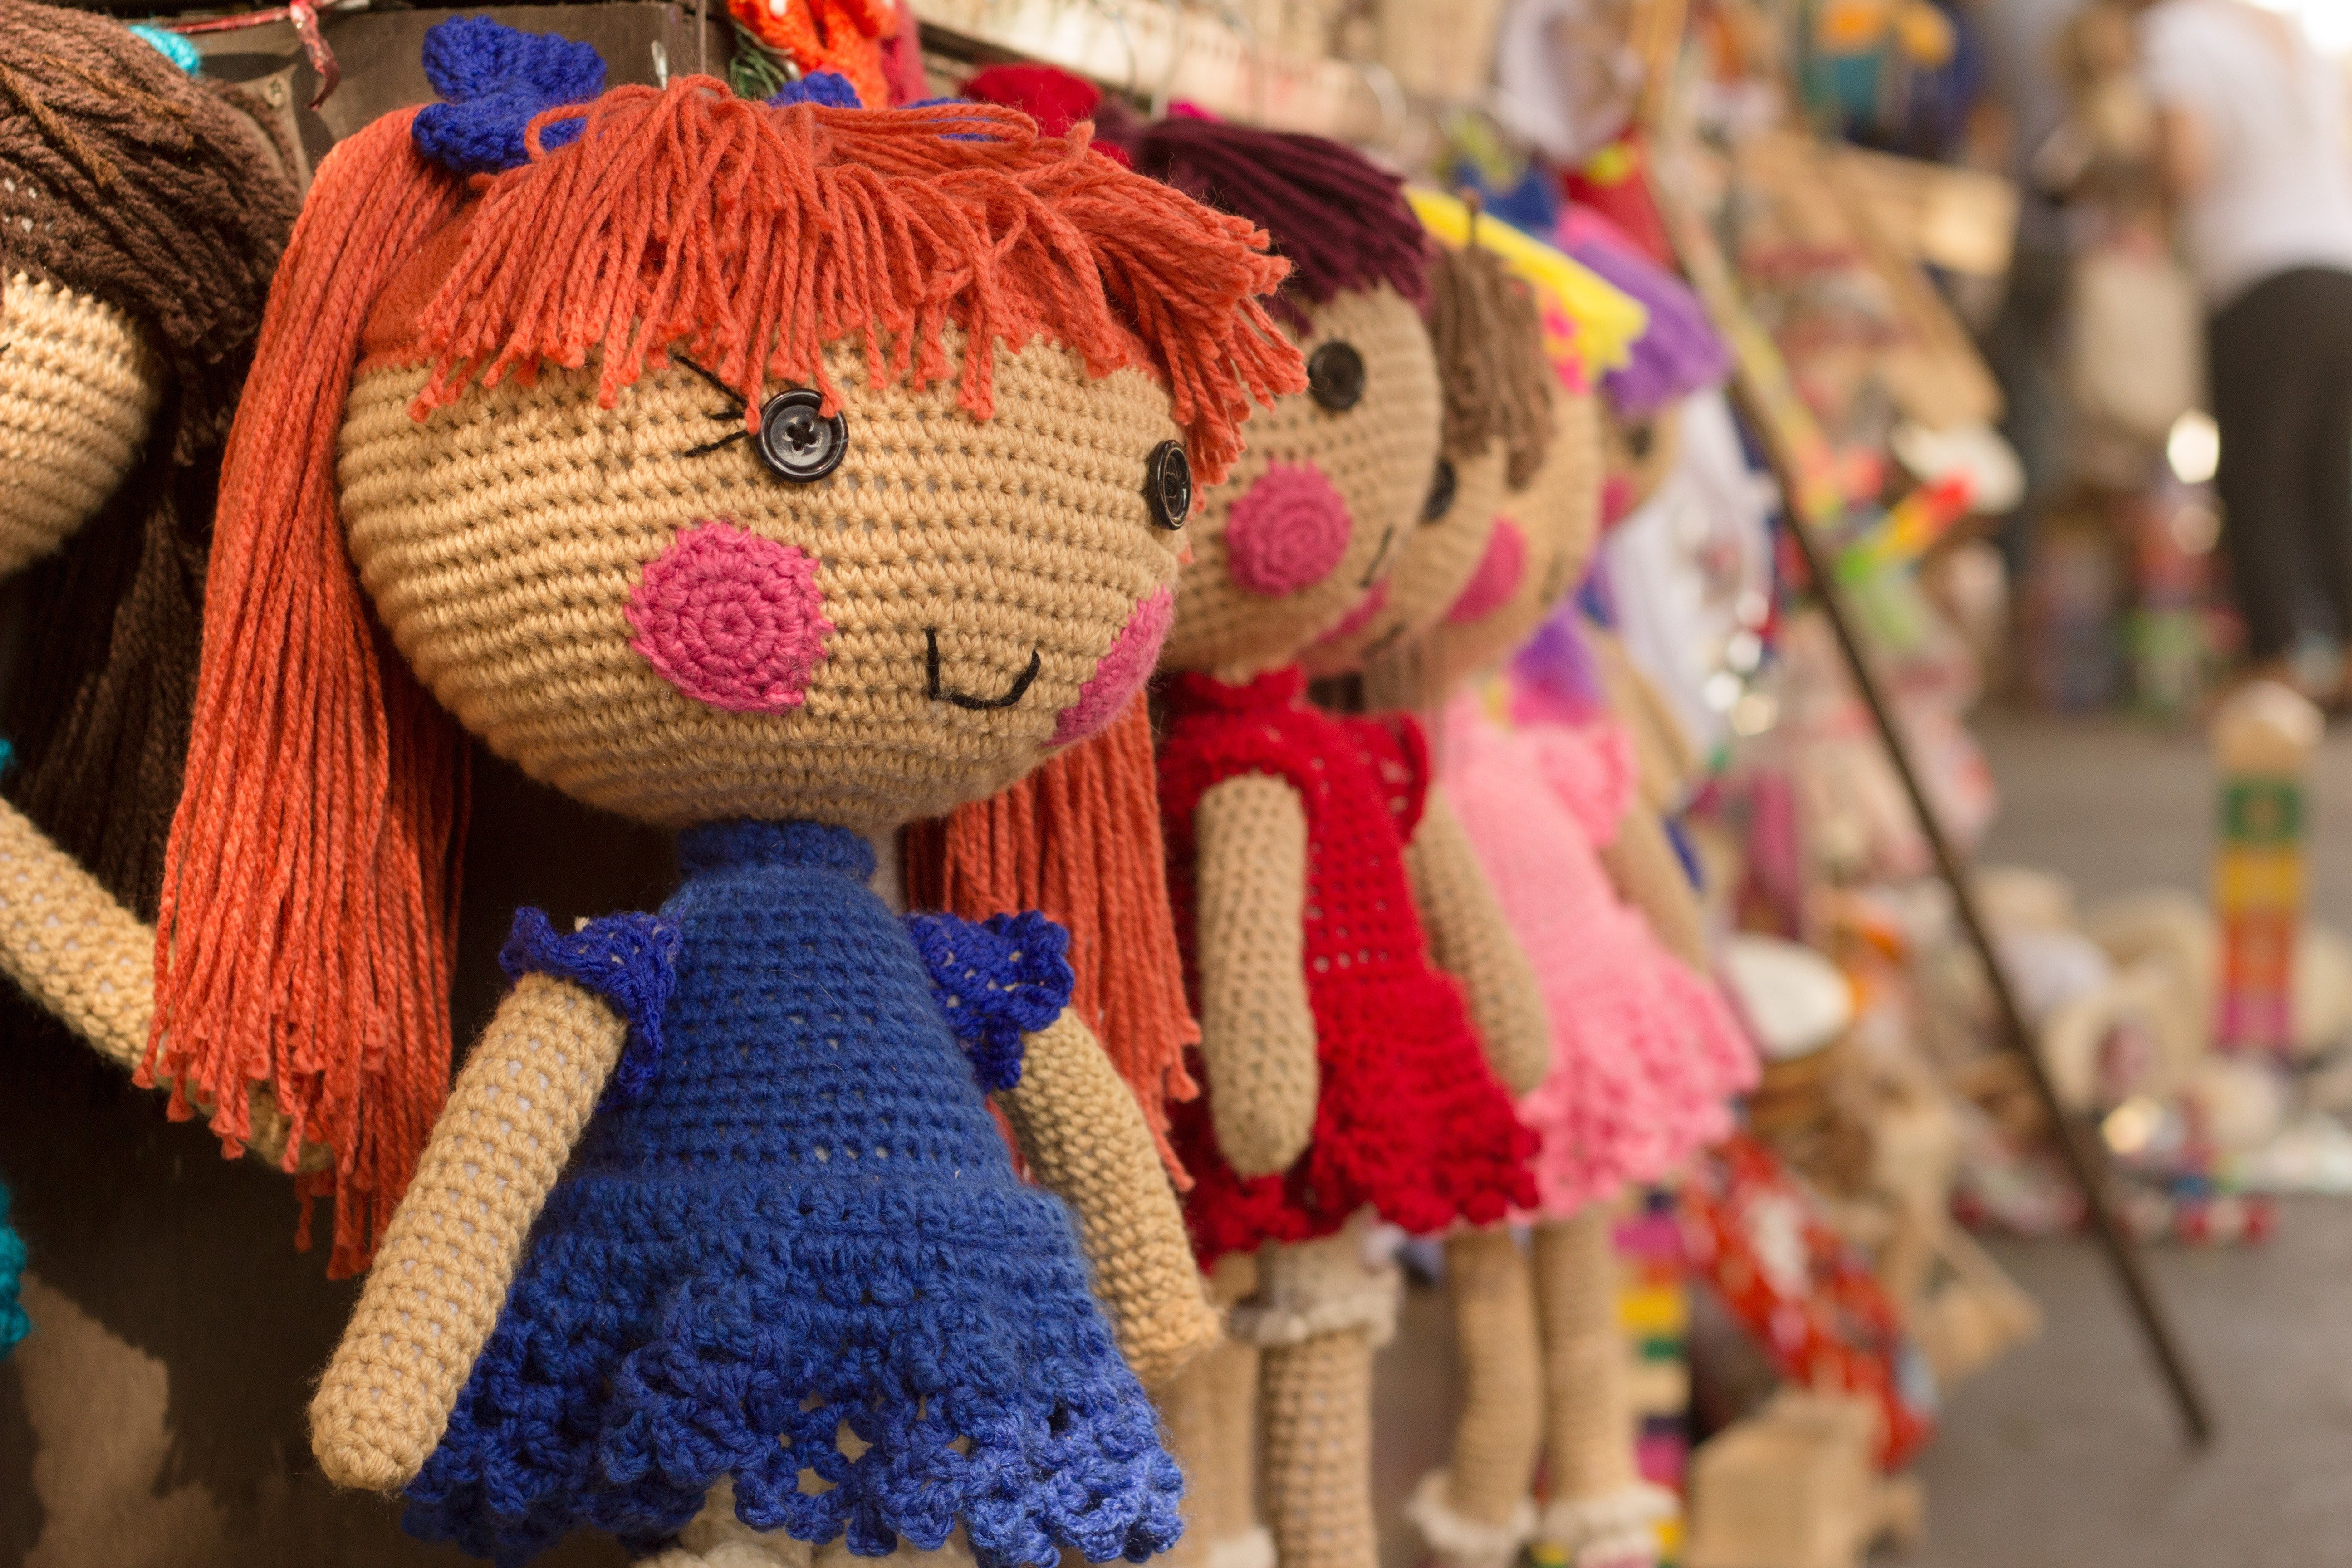 The old woman sold dolls for a living | Photo: Pexels